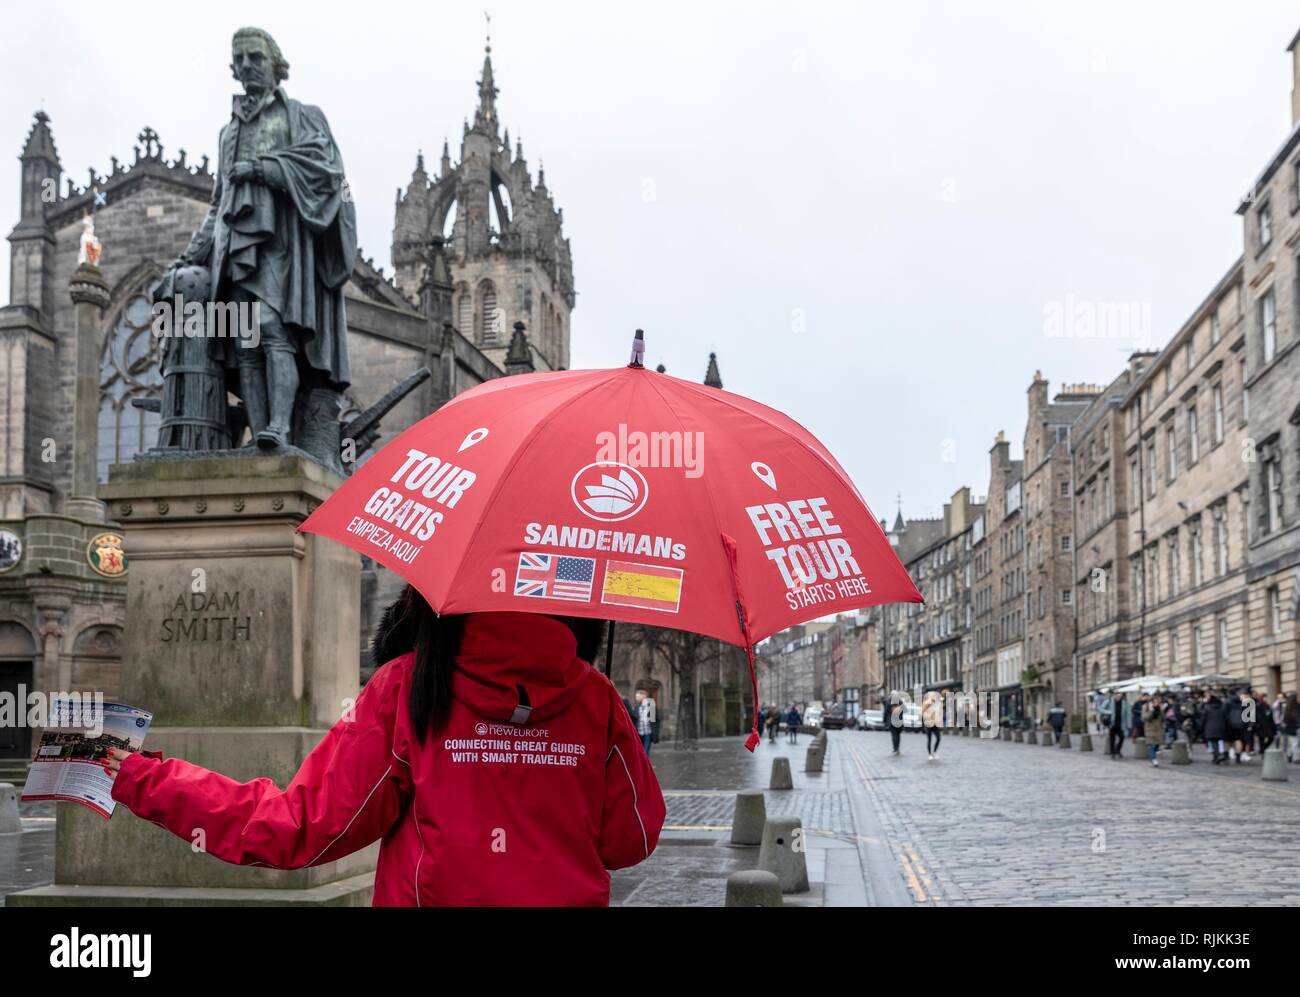 Edinburgh, UK. 07th Feb, 2019. Councillors in Scotland's capital city, Edinburgh, vote on proposals to introduce a tourist tax of £2 per person, per night. The proposals, if approved, will also need legislative change by the Scottish Government which was signalled in the recent Budget. Pictured: One of the many Free Tours sellers on Edinburgh's Royal Mile under a statue of free-market economist, Adam Smith Credit: Rich Dyson/Alamy Live News Stock Photo